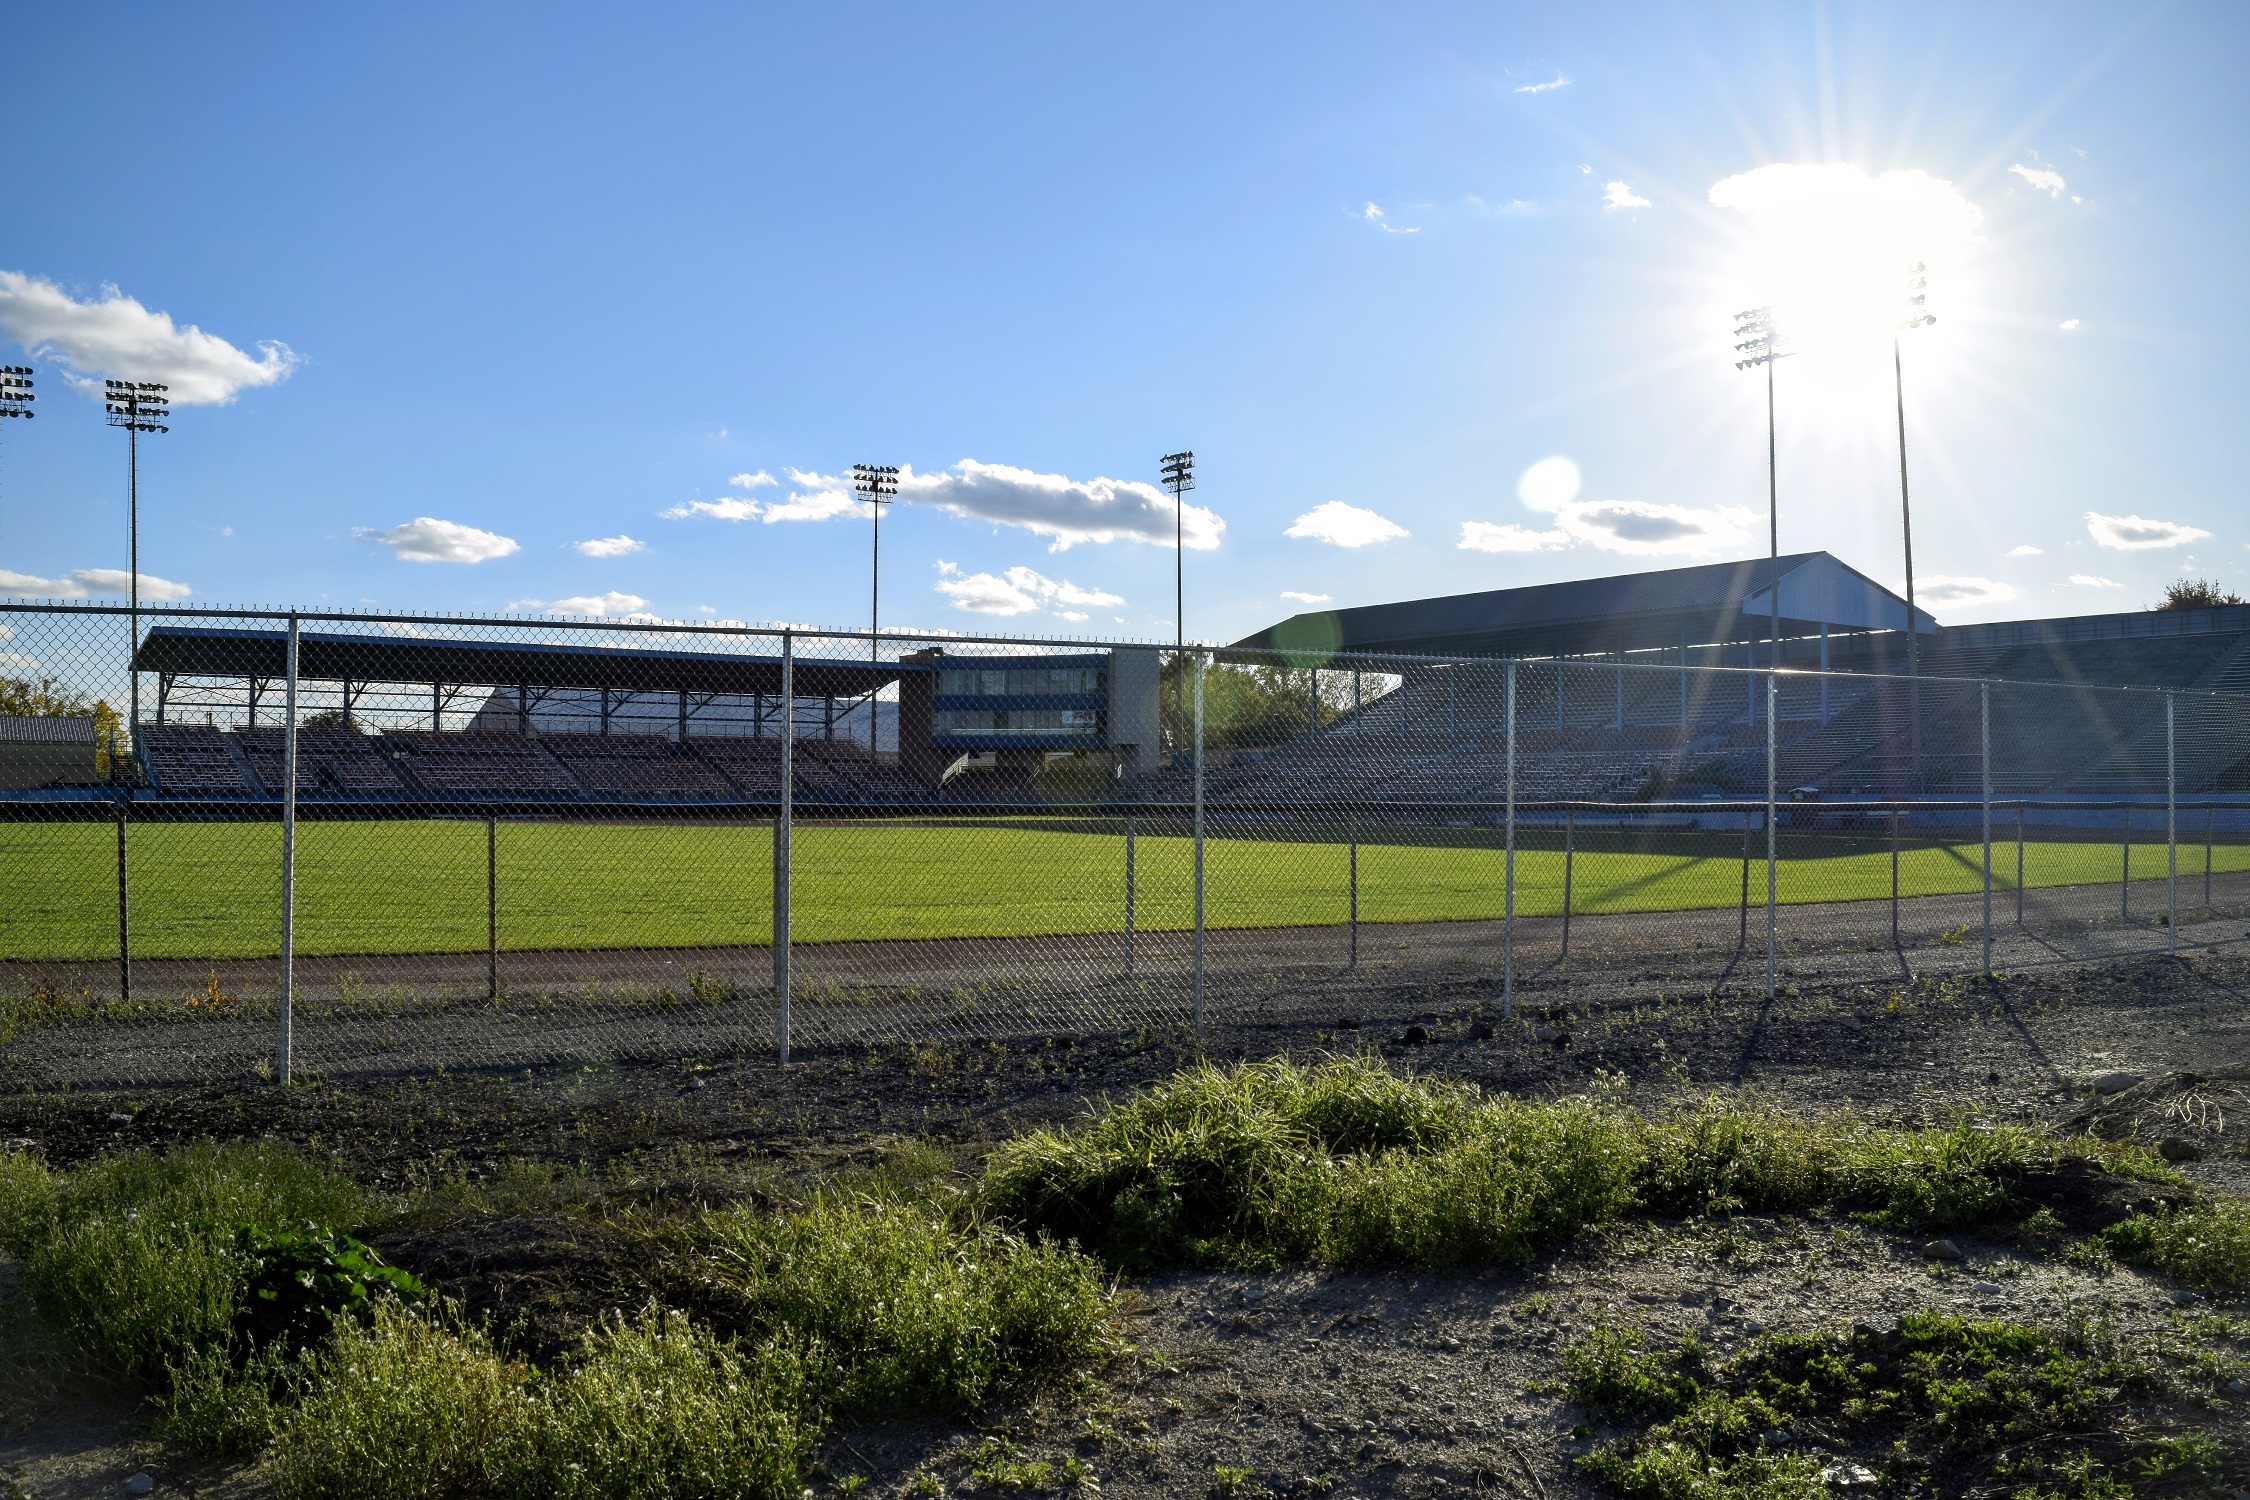 View of Lucas County Rec Center, formally Ned Skeldon Stadium in Fall of 2016